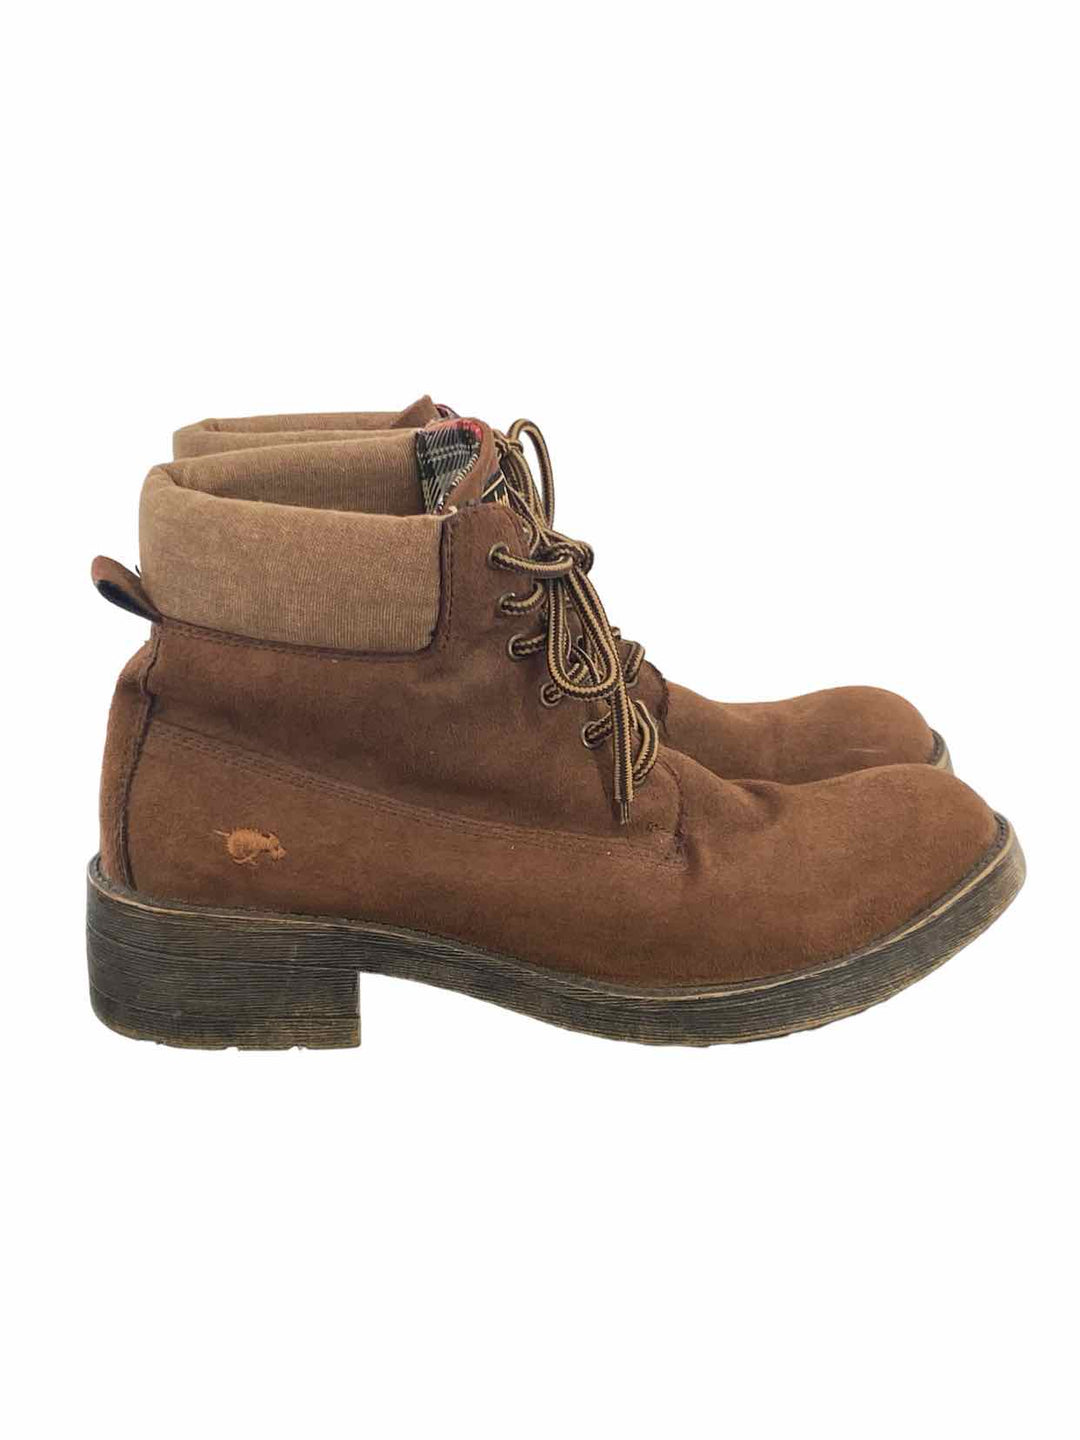 Rocket Dog Shoe Size 8 Brown Boots(Ankle)